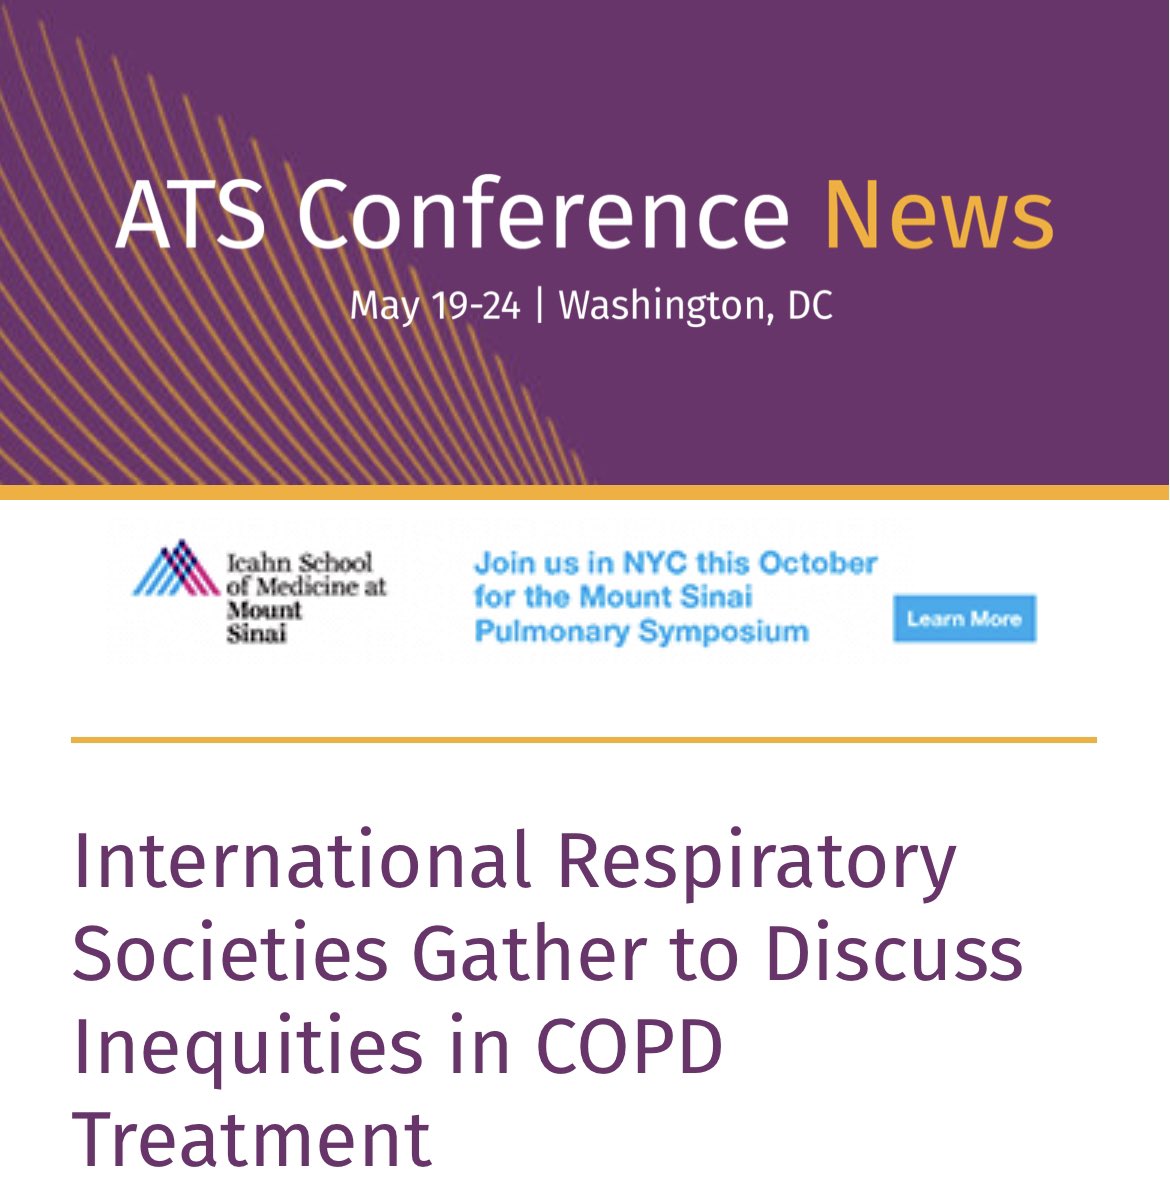 The Challenges of Access to Medicines and the Impact of Public and Private Health Policies in the Americas.
Learn more about this great #ATS2023 session here 

atsconferencenews.org/international-…